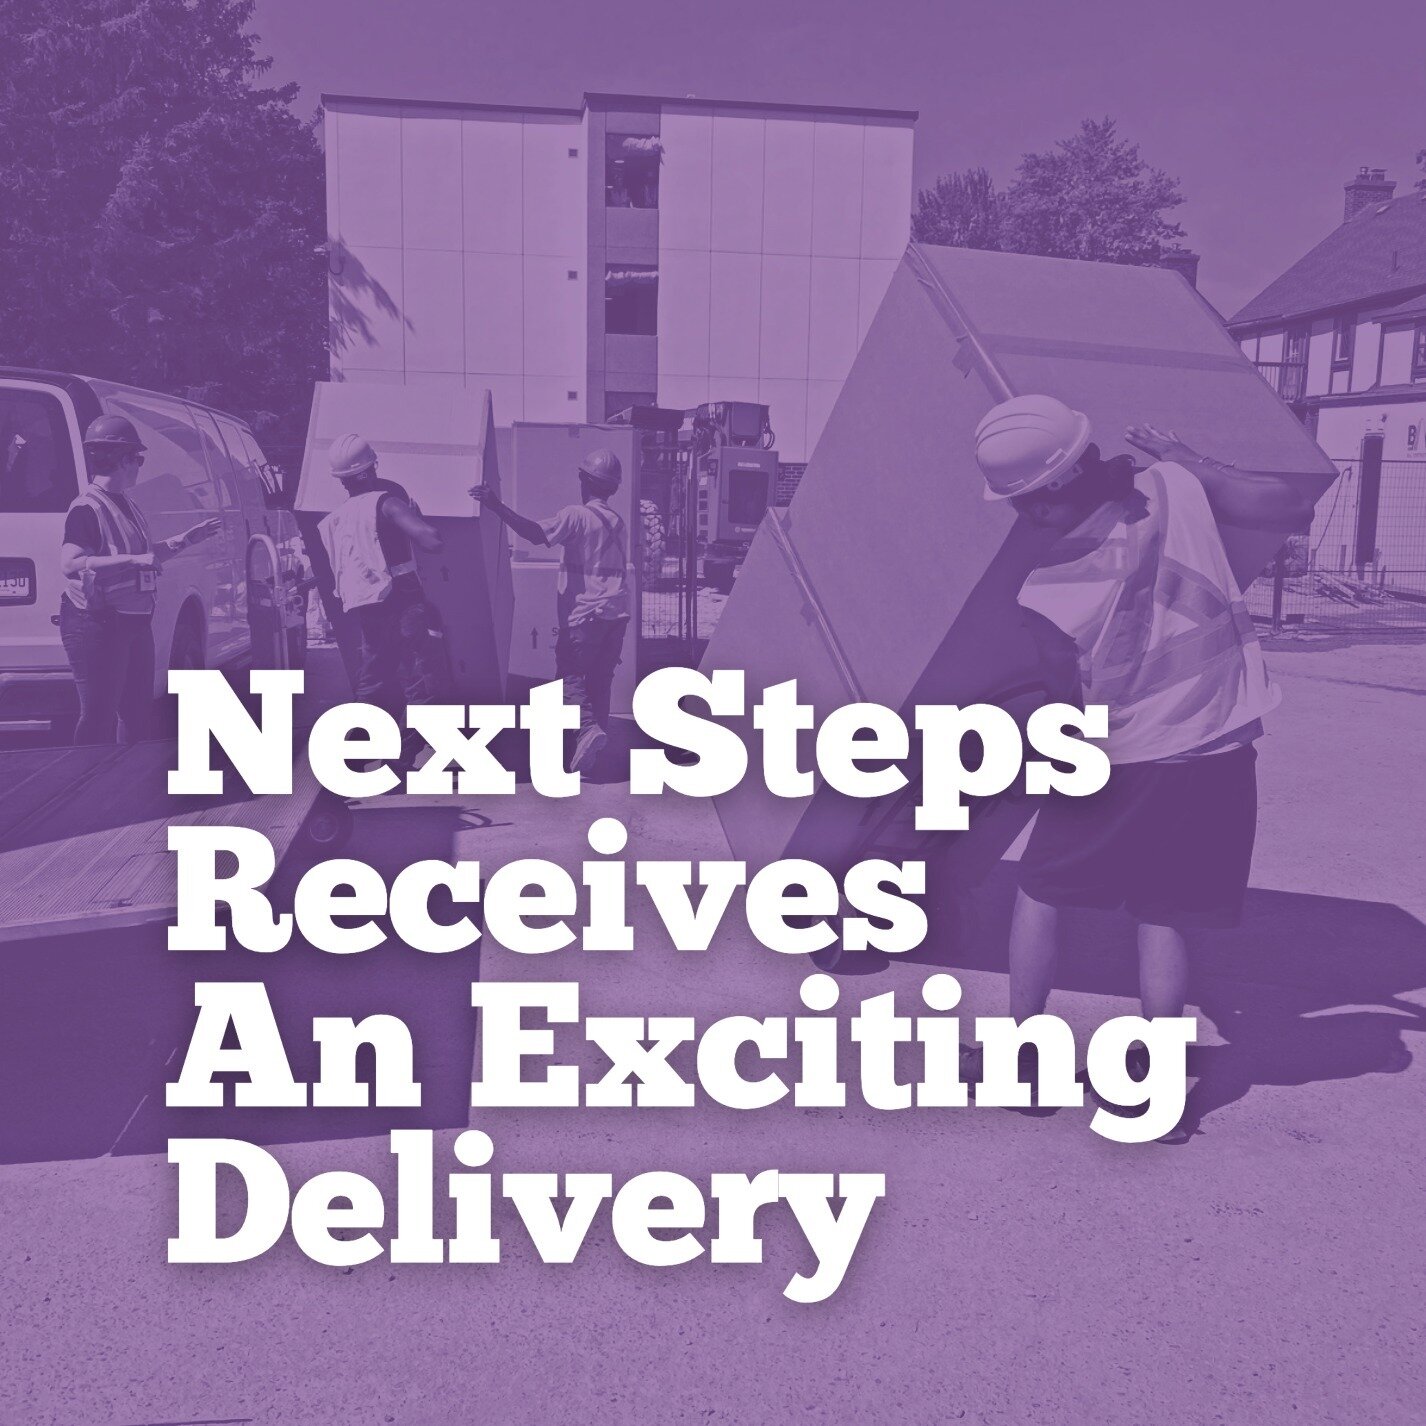 With the help and generosity of many, our Next Steps Housing program was able to move 44 units' worth of furniture (including night tables, dressers, accent chairs, kitchen chairs, tables/desks and mattresses) into our still evolving #SupportiveHousi